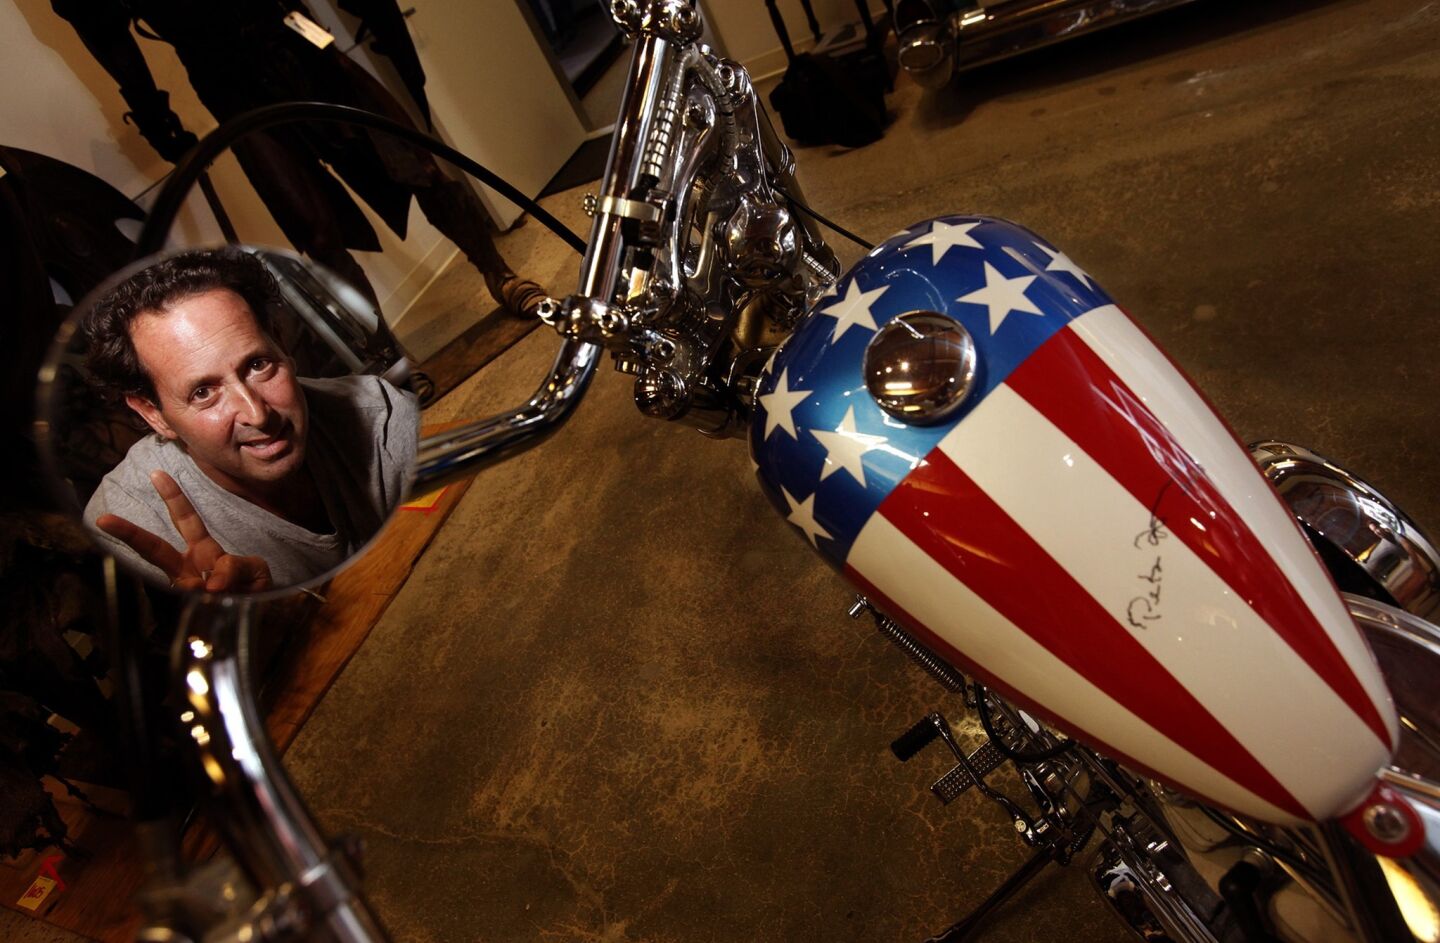 Michael Eisenberg is reflected in the side-view mirror of his "Captain America" chopper. Eisenberg bought the bike in early 2014 from John Parham, a Midwestern motorcycle parts magnate who had purchased the bike from Dan Haggerty 12 years earlier.